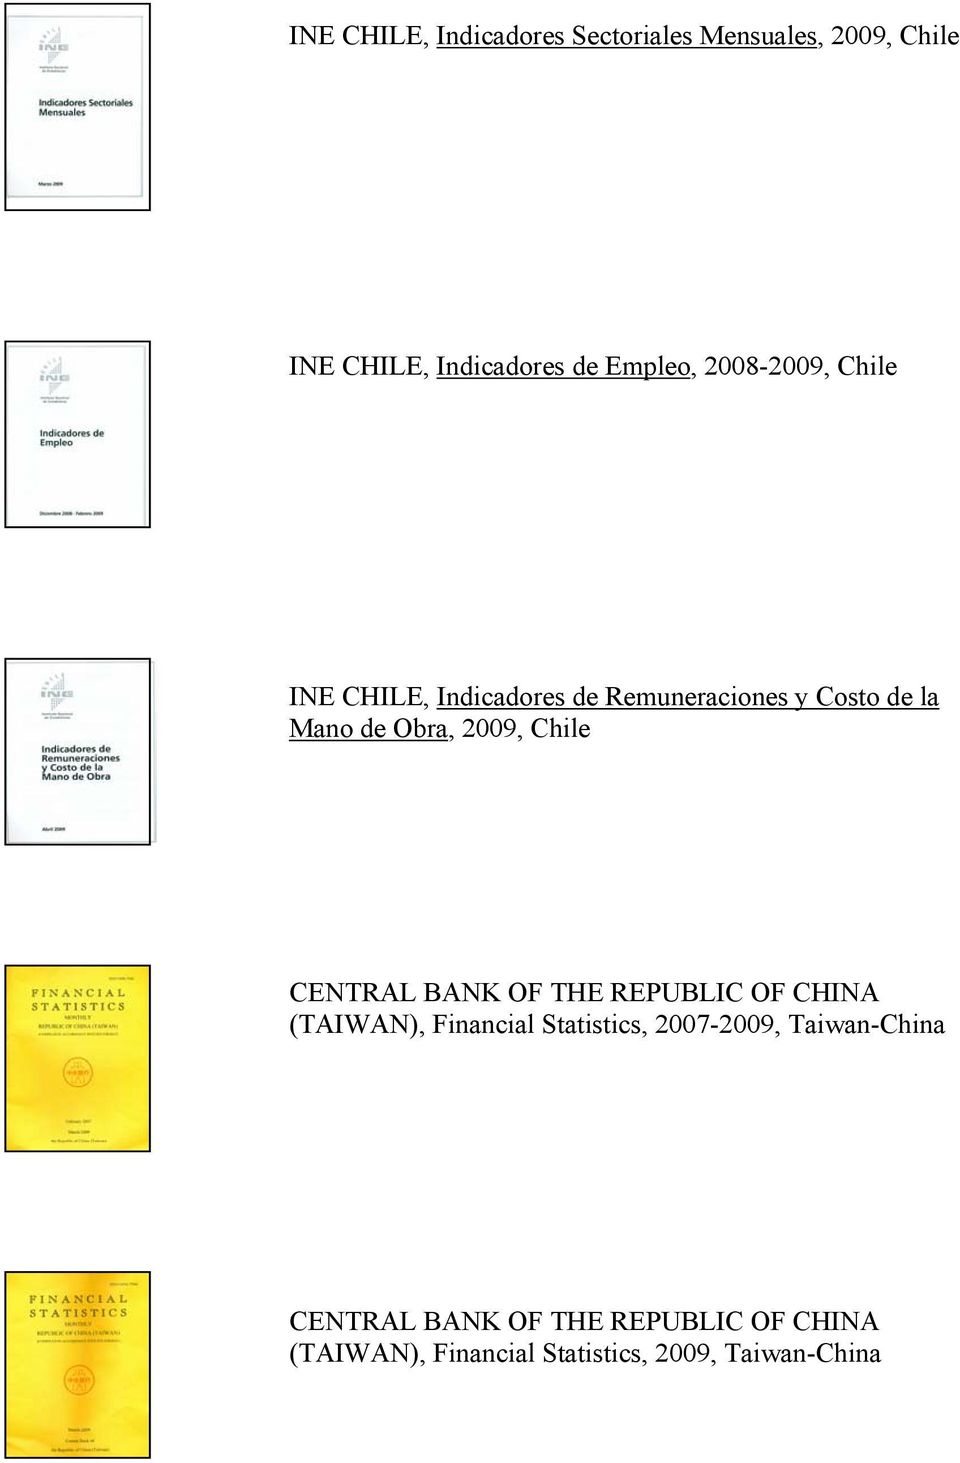 Chile CENTRAL BANK OF THE REPUBLIC OF CHINA (TAIWAN), Financial Statistics, 2007-2009,